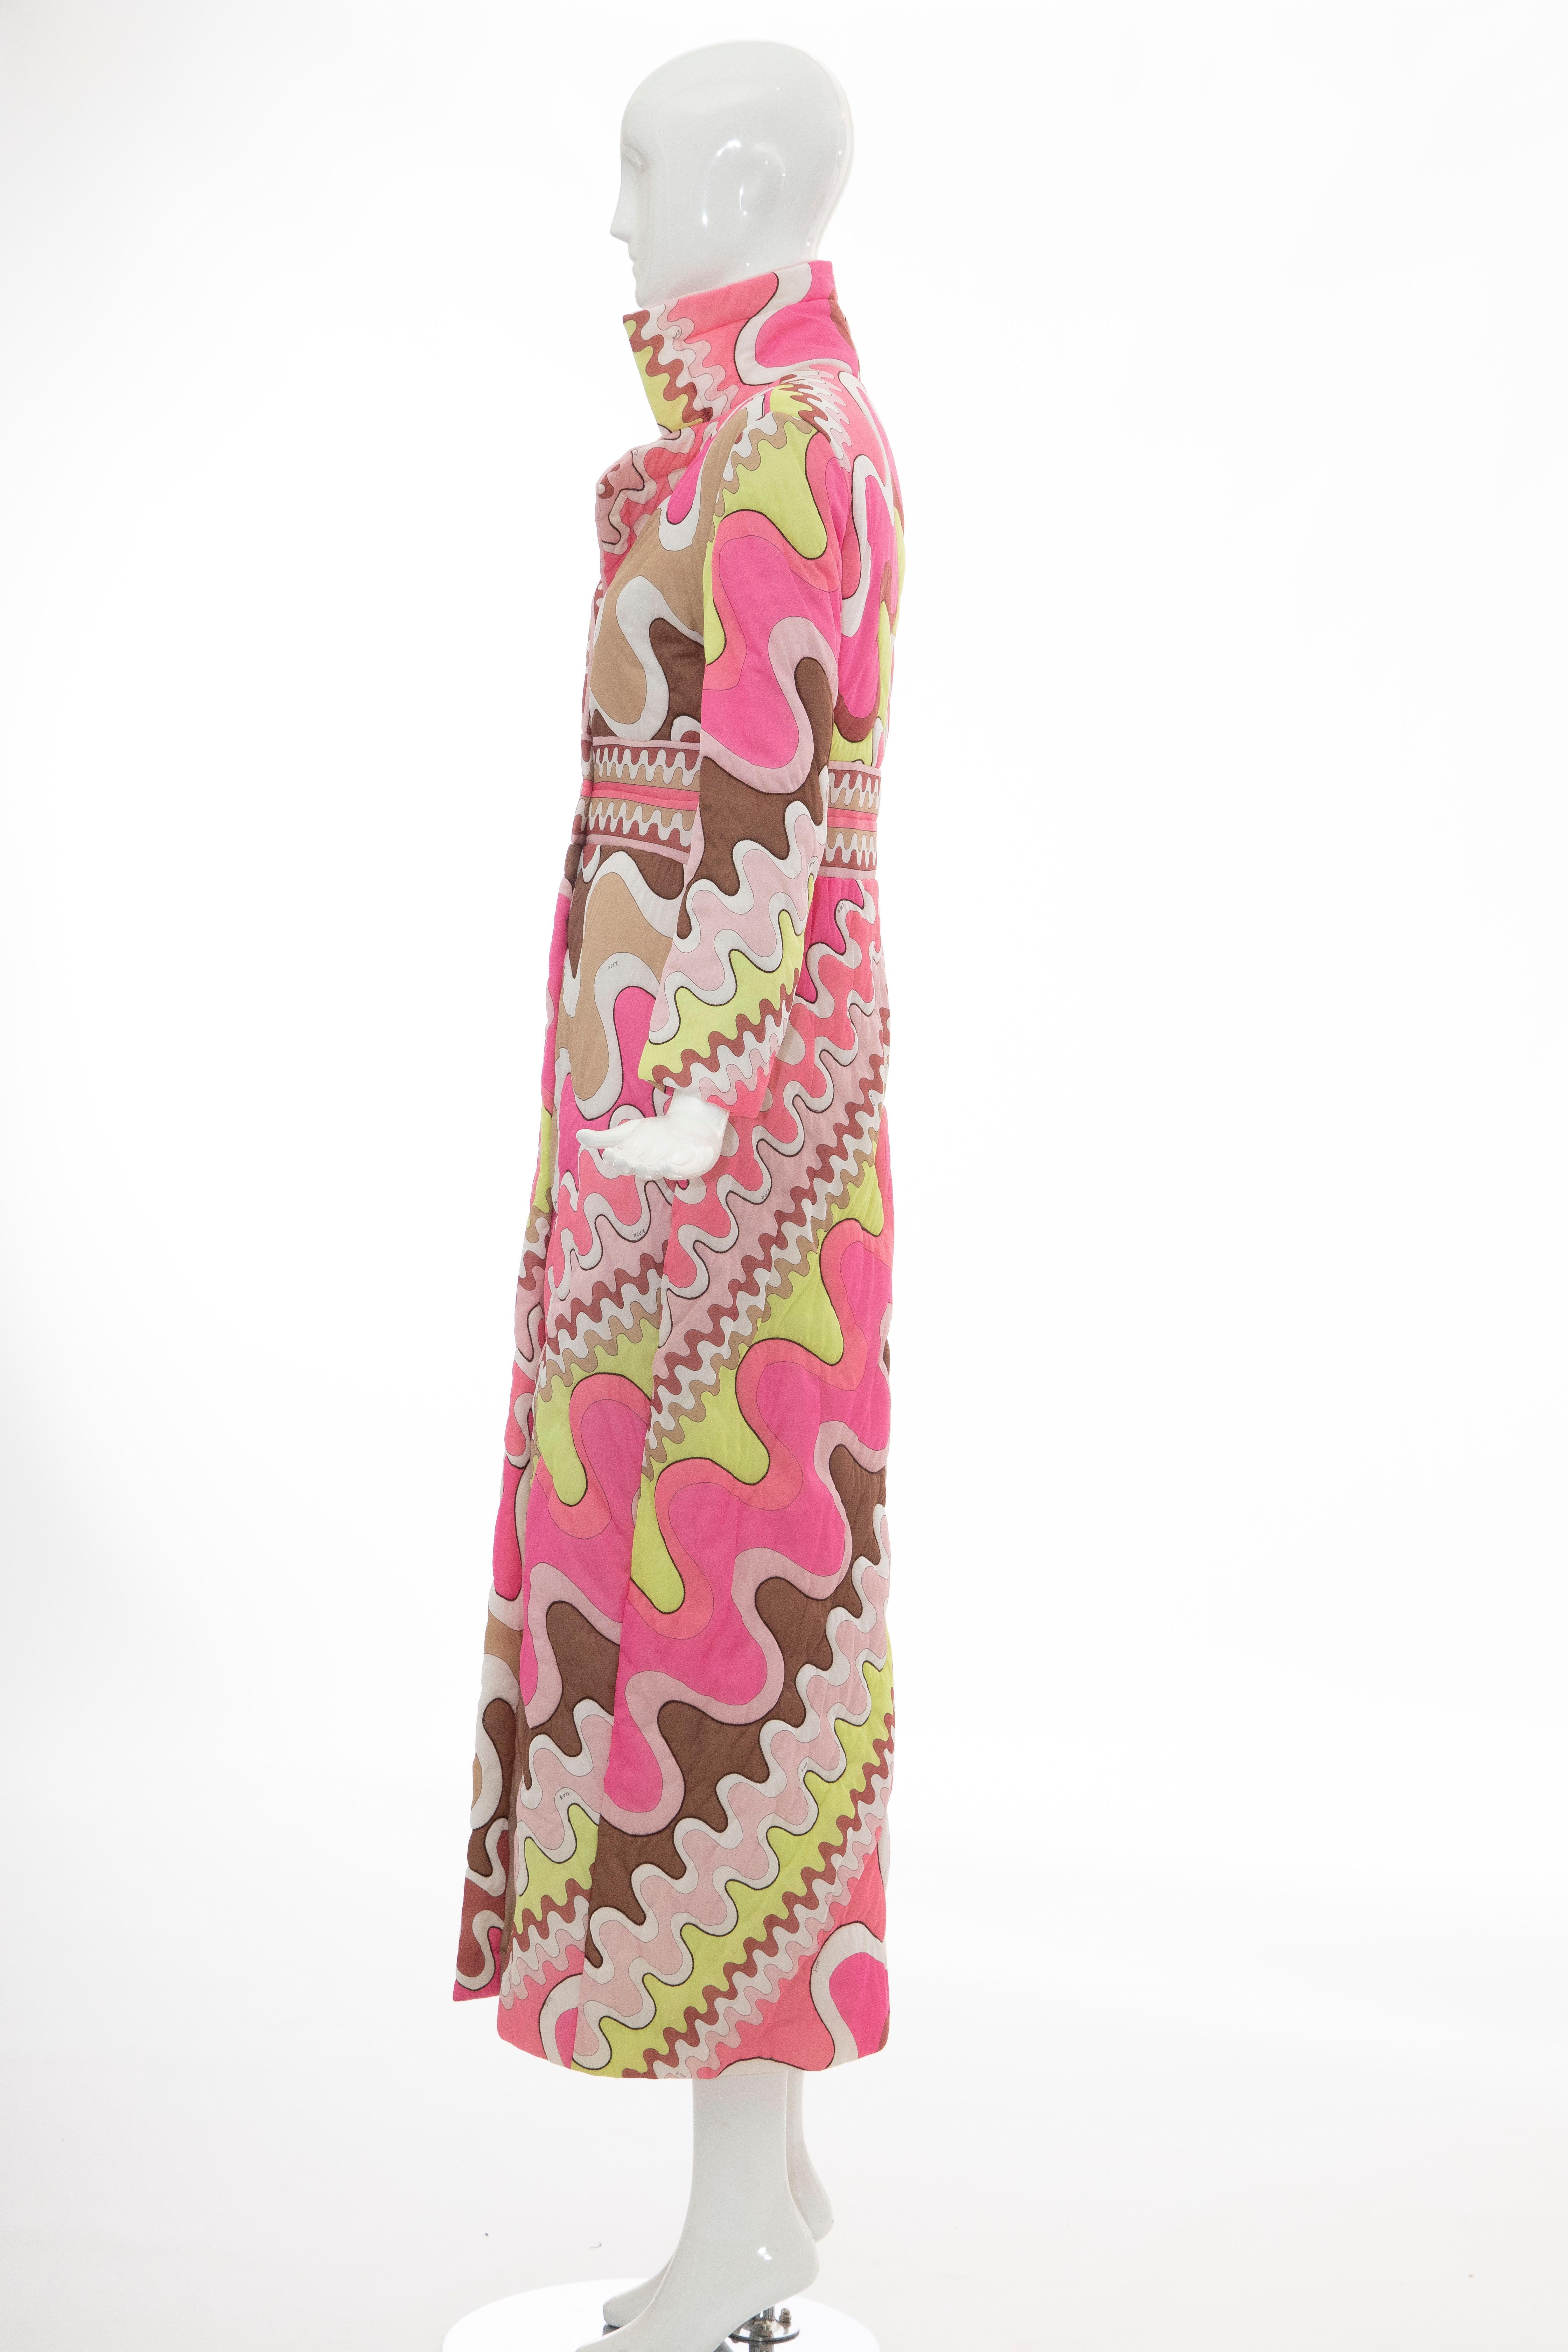 Emilio Pucci Double-Breasted Abstract Print Quilted Coat, Circa: 1970's 4